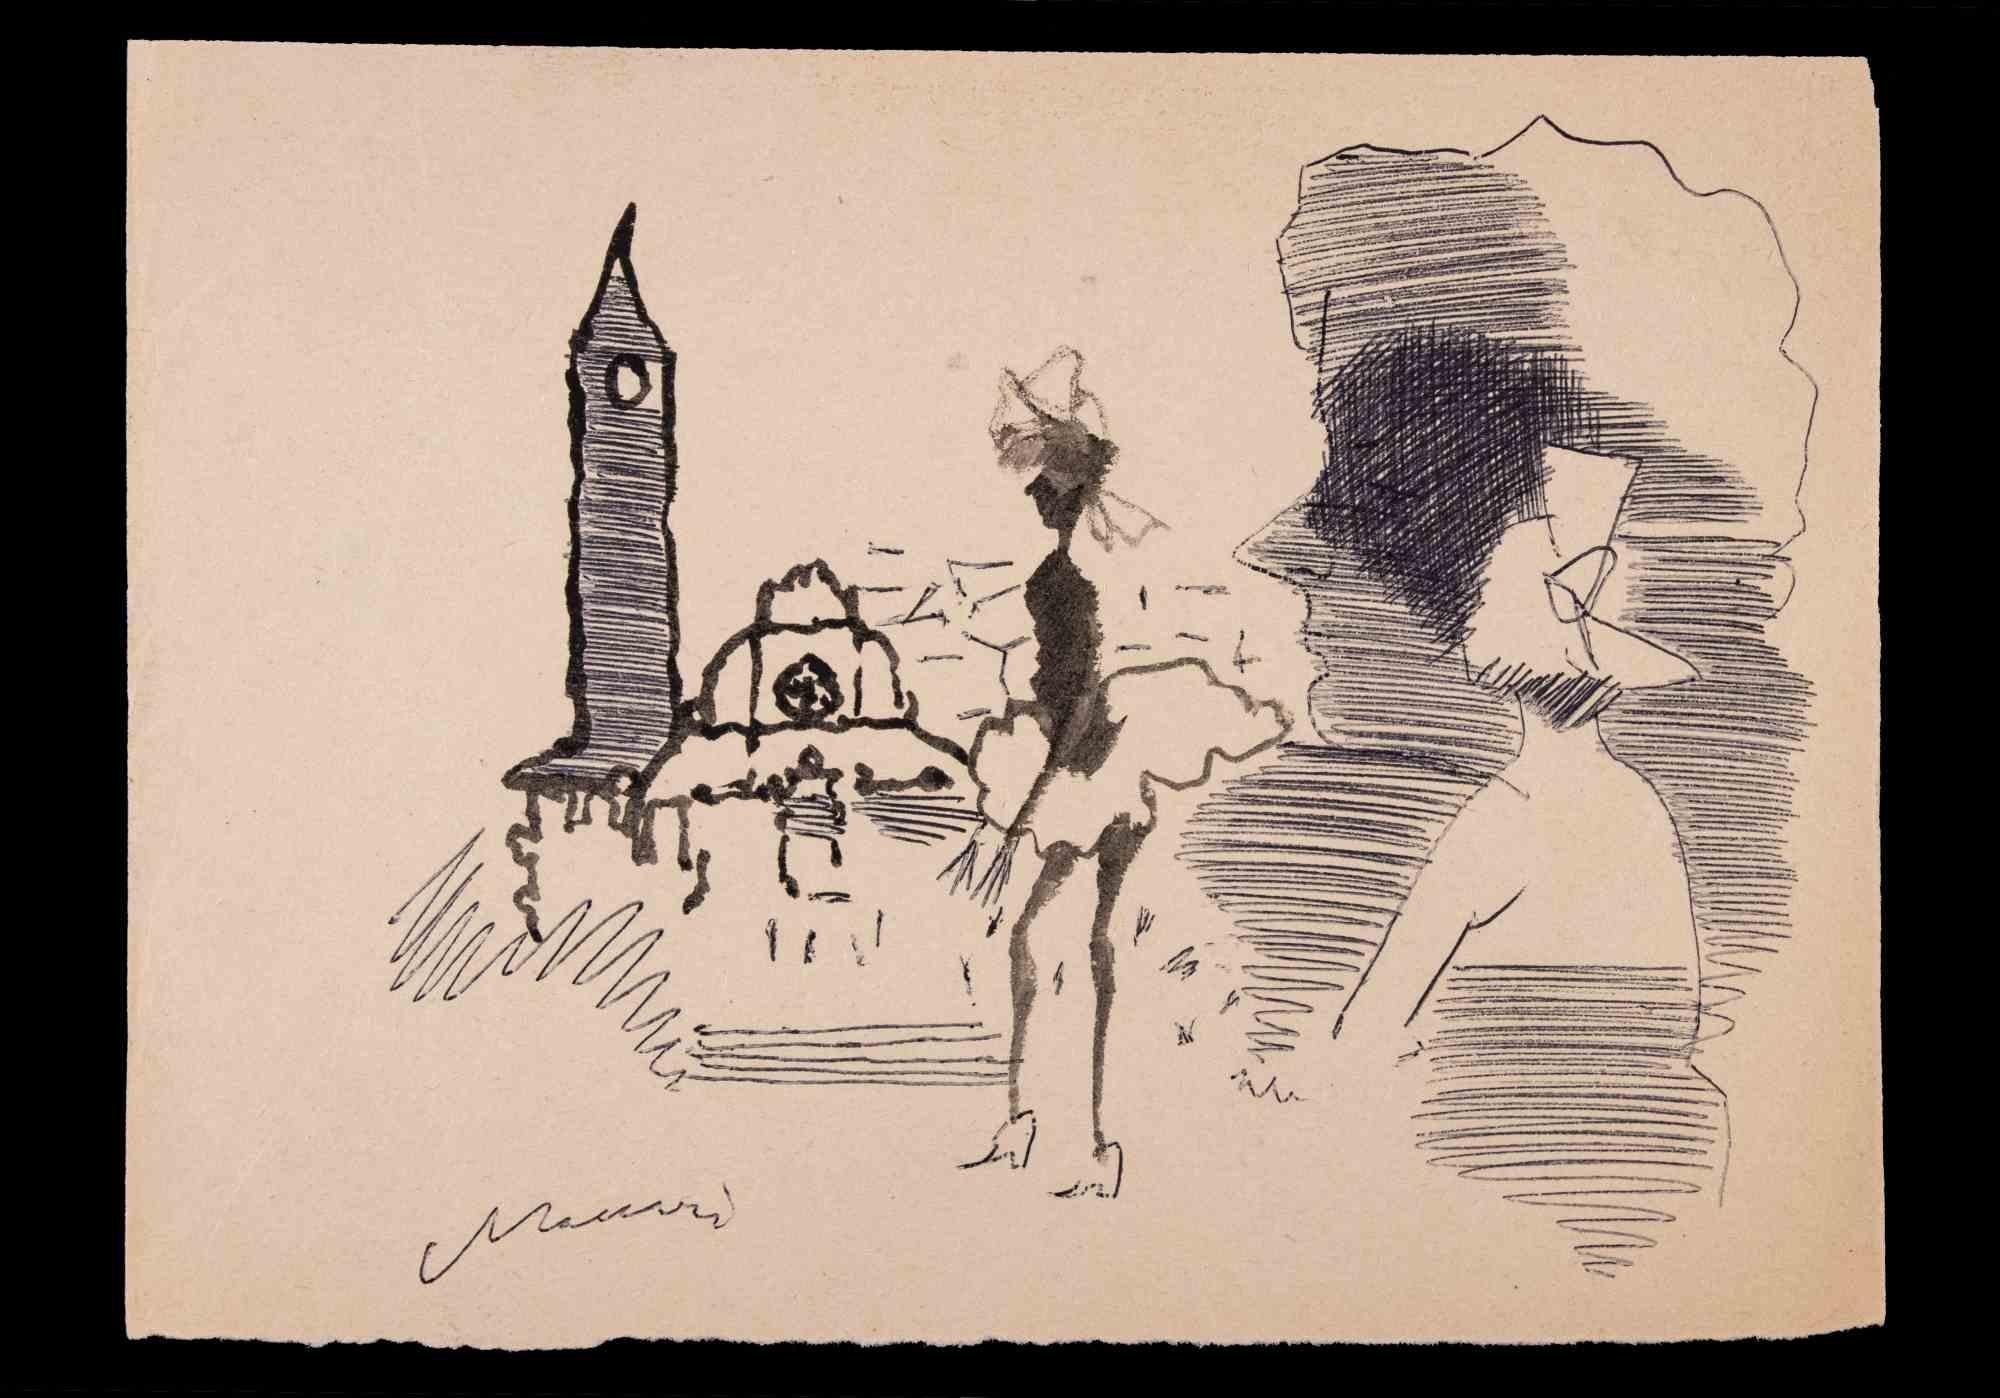 Figures in the City is a Pen and Ink Drawing realized by Mino Maccari (1924-1989) in 1962.

Hand signed on the lower margin.

Good condition on a yellowed paper.

Mino Maccari (Siena, 1924-Rome, June 16, 1989) was an Italian writer, painter,